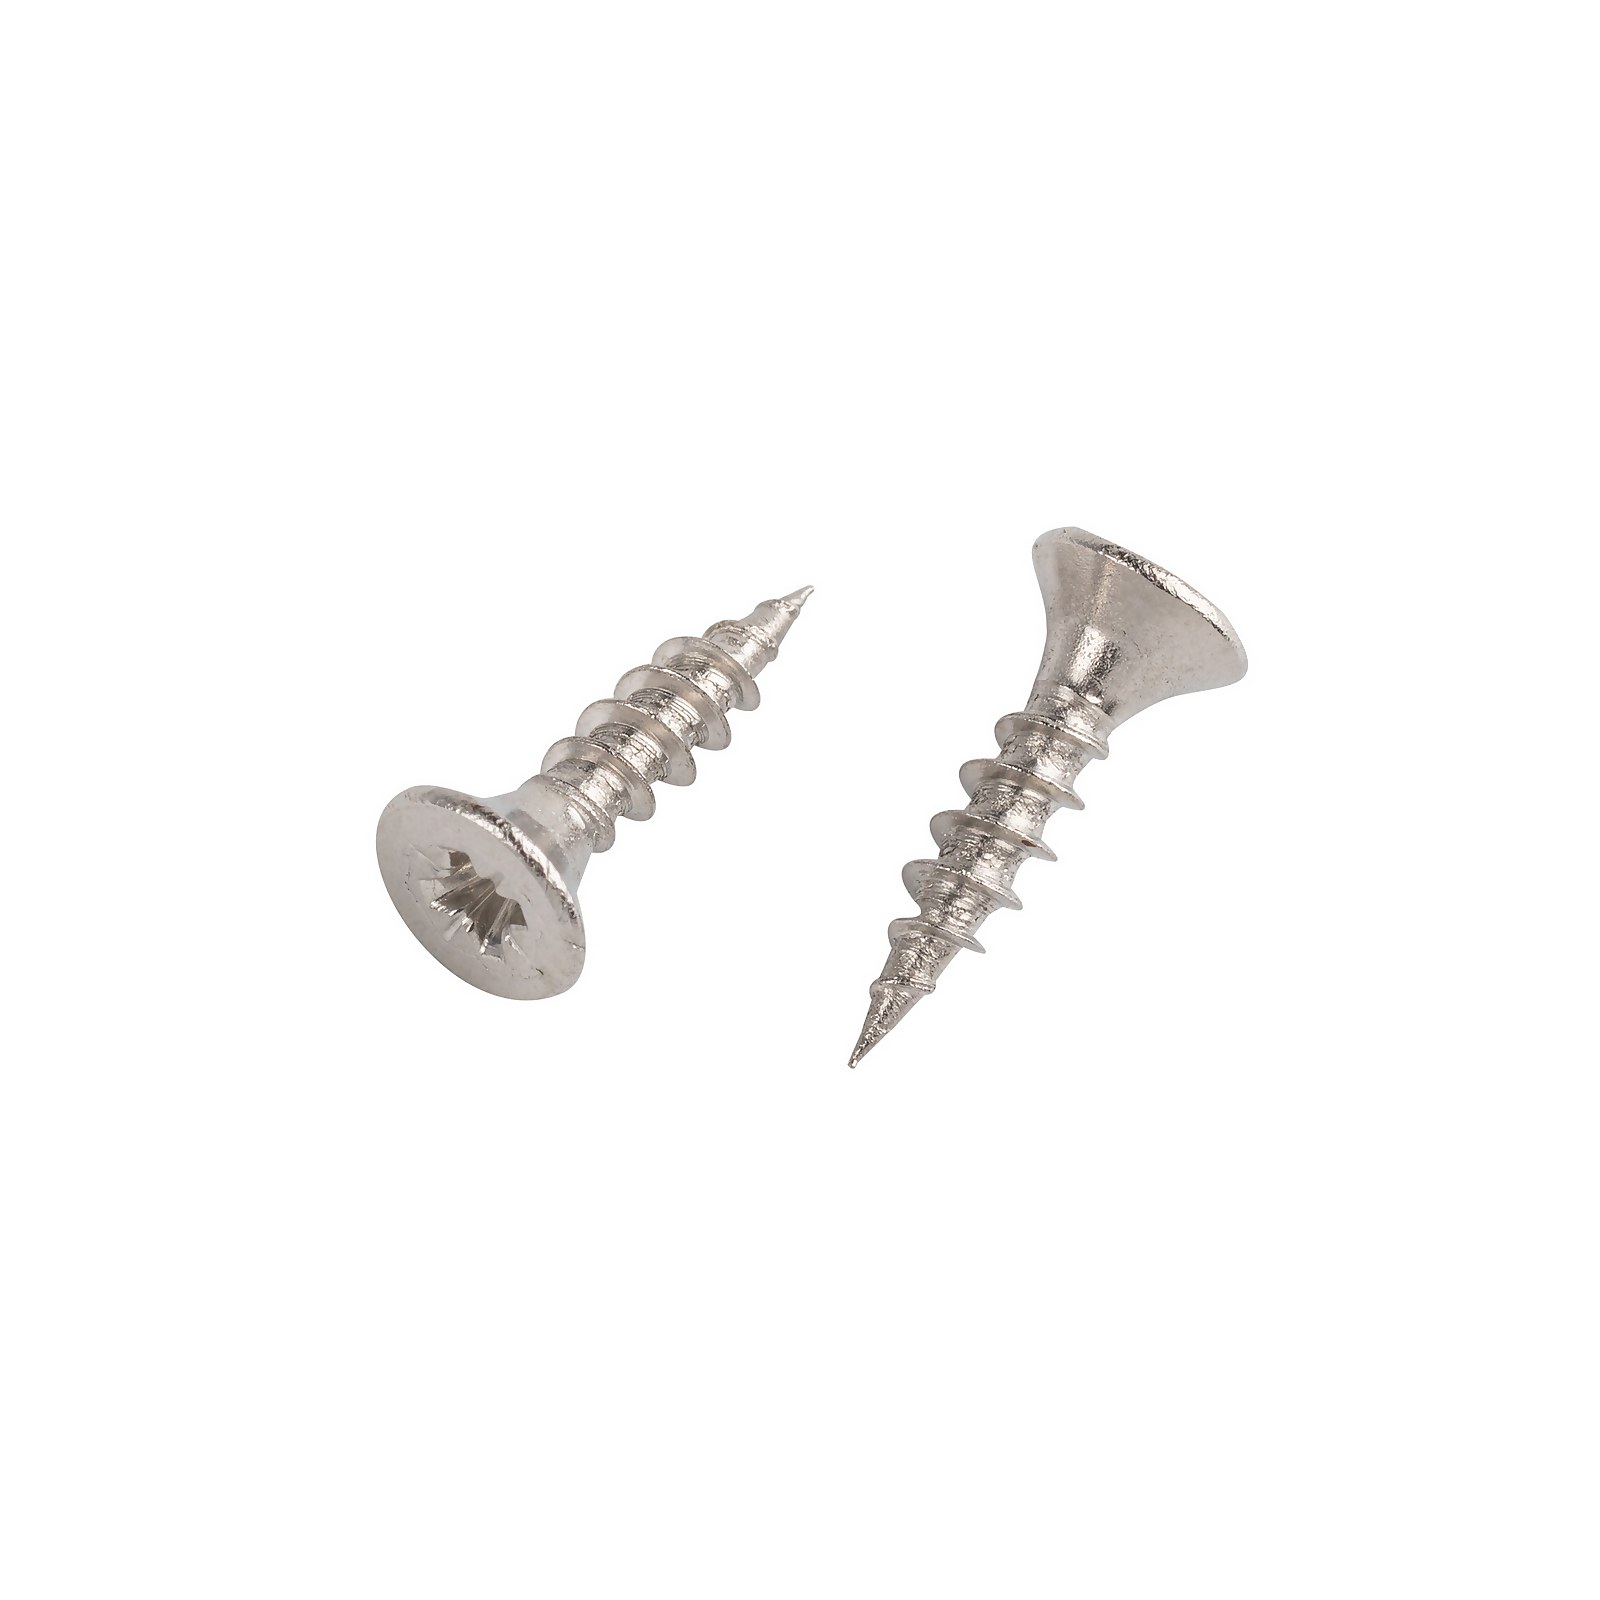 Photo of Homebase Stainless Steel Single Thread Screw 3 X 12mm 25 Pack